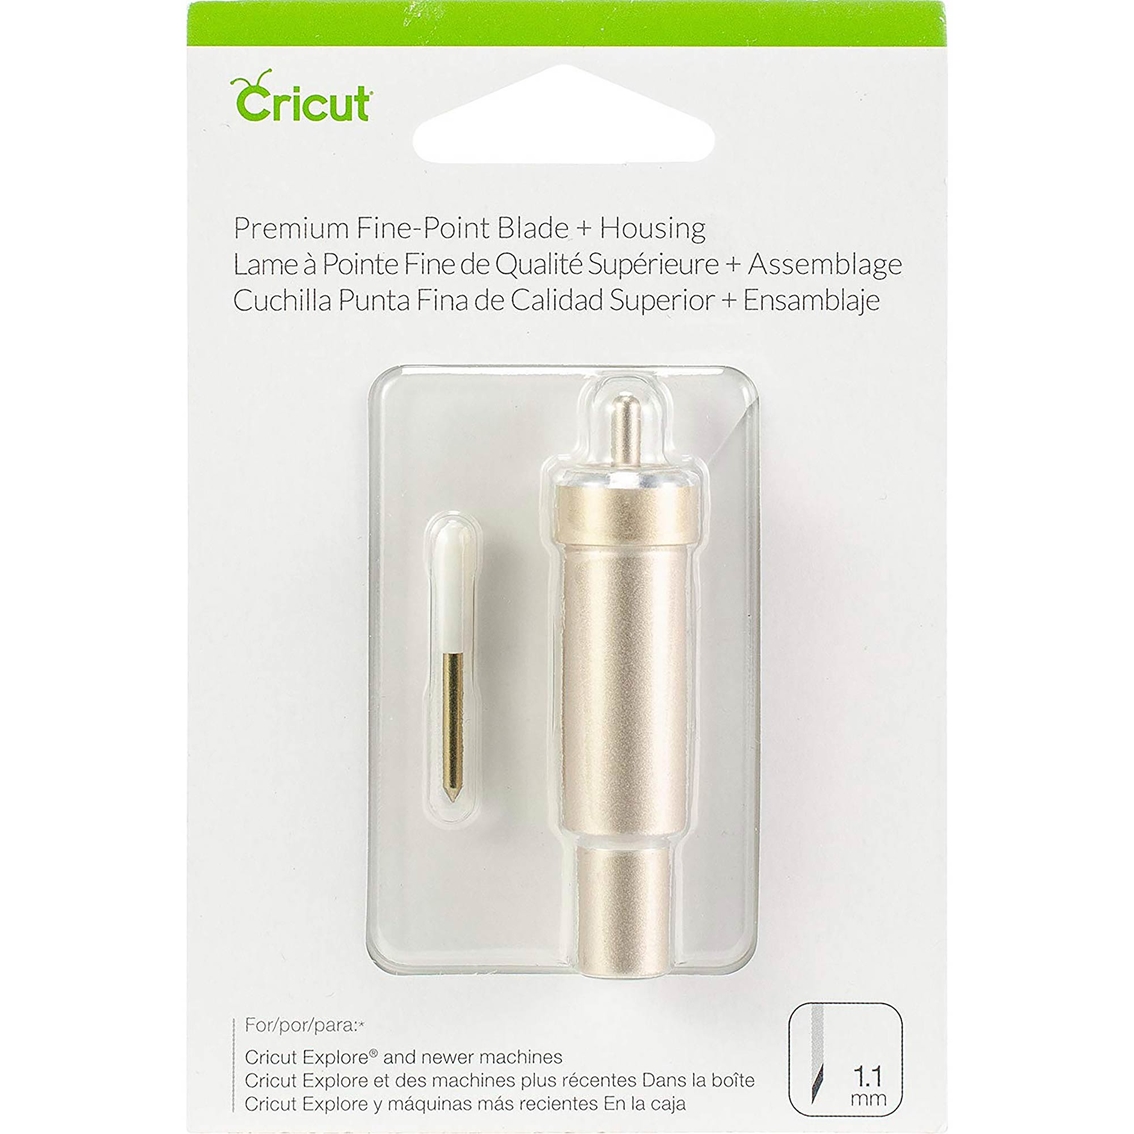  Cricut Premium Fine-Point Blade + Housing, Cutting Blade for  Light to Mid-Weight Materials Like Cardstock, Vinyl, Iron-On & More, Works  with Cricut Maker & Explore Machines, Gold